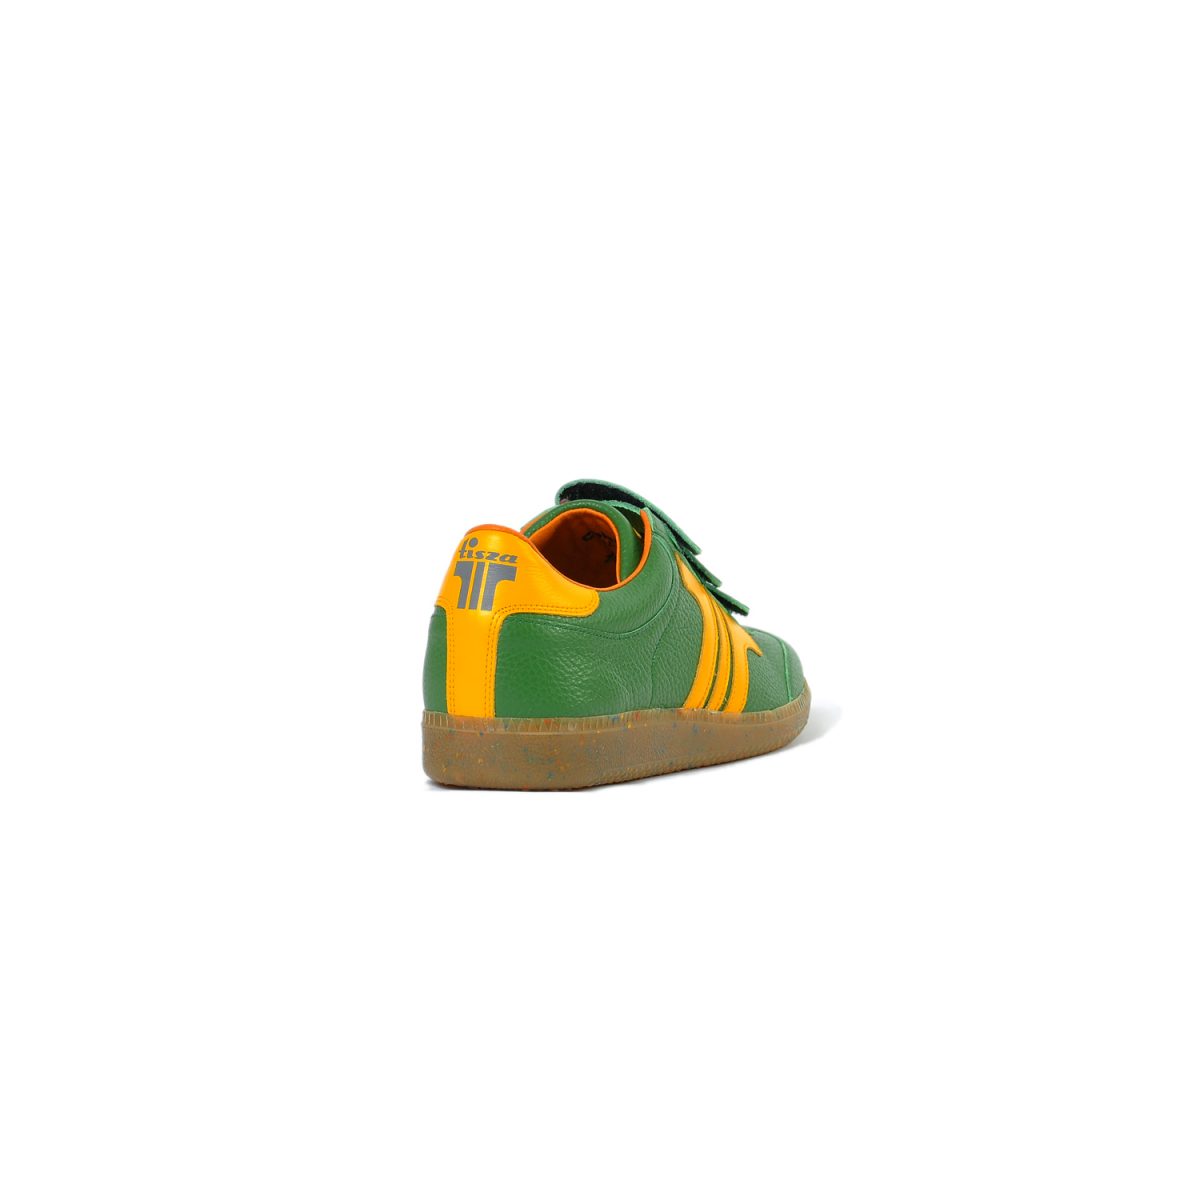 Tisza shoes - Delux - Green-yellow